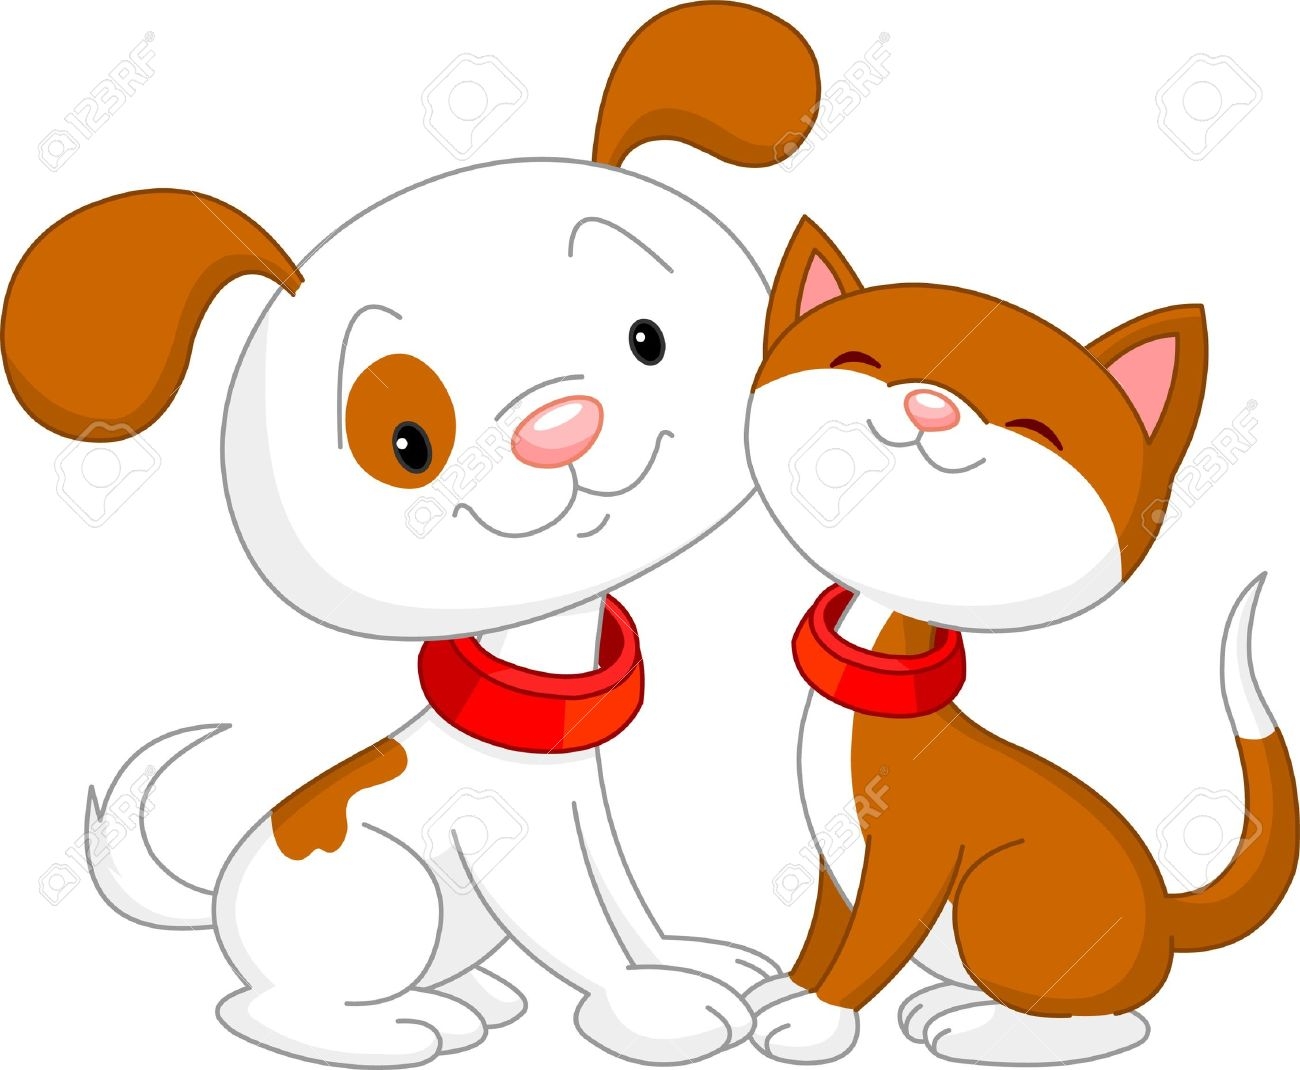 dog-and-cat-clipart.jpg .